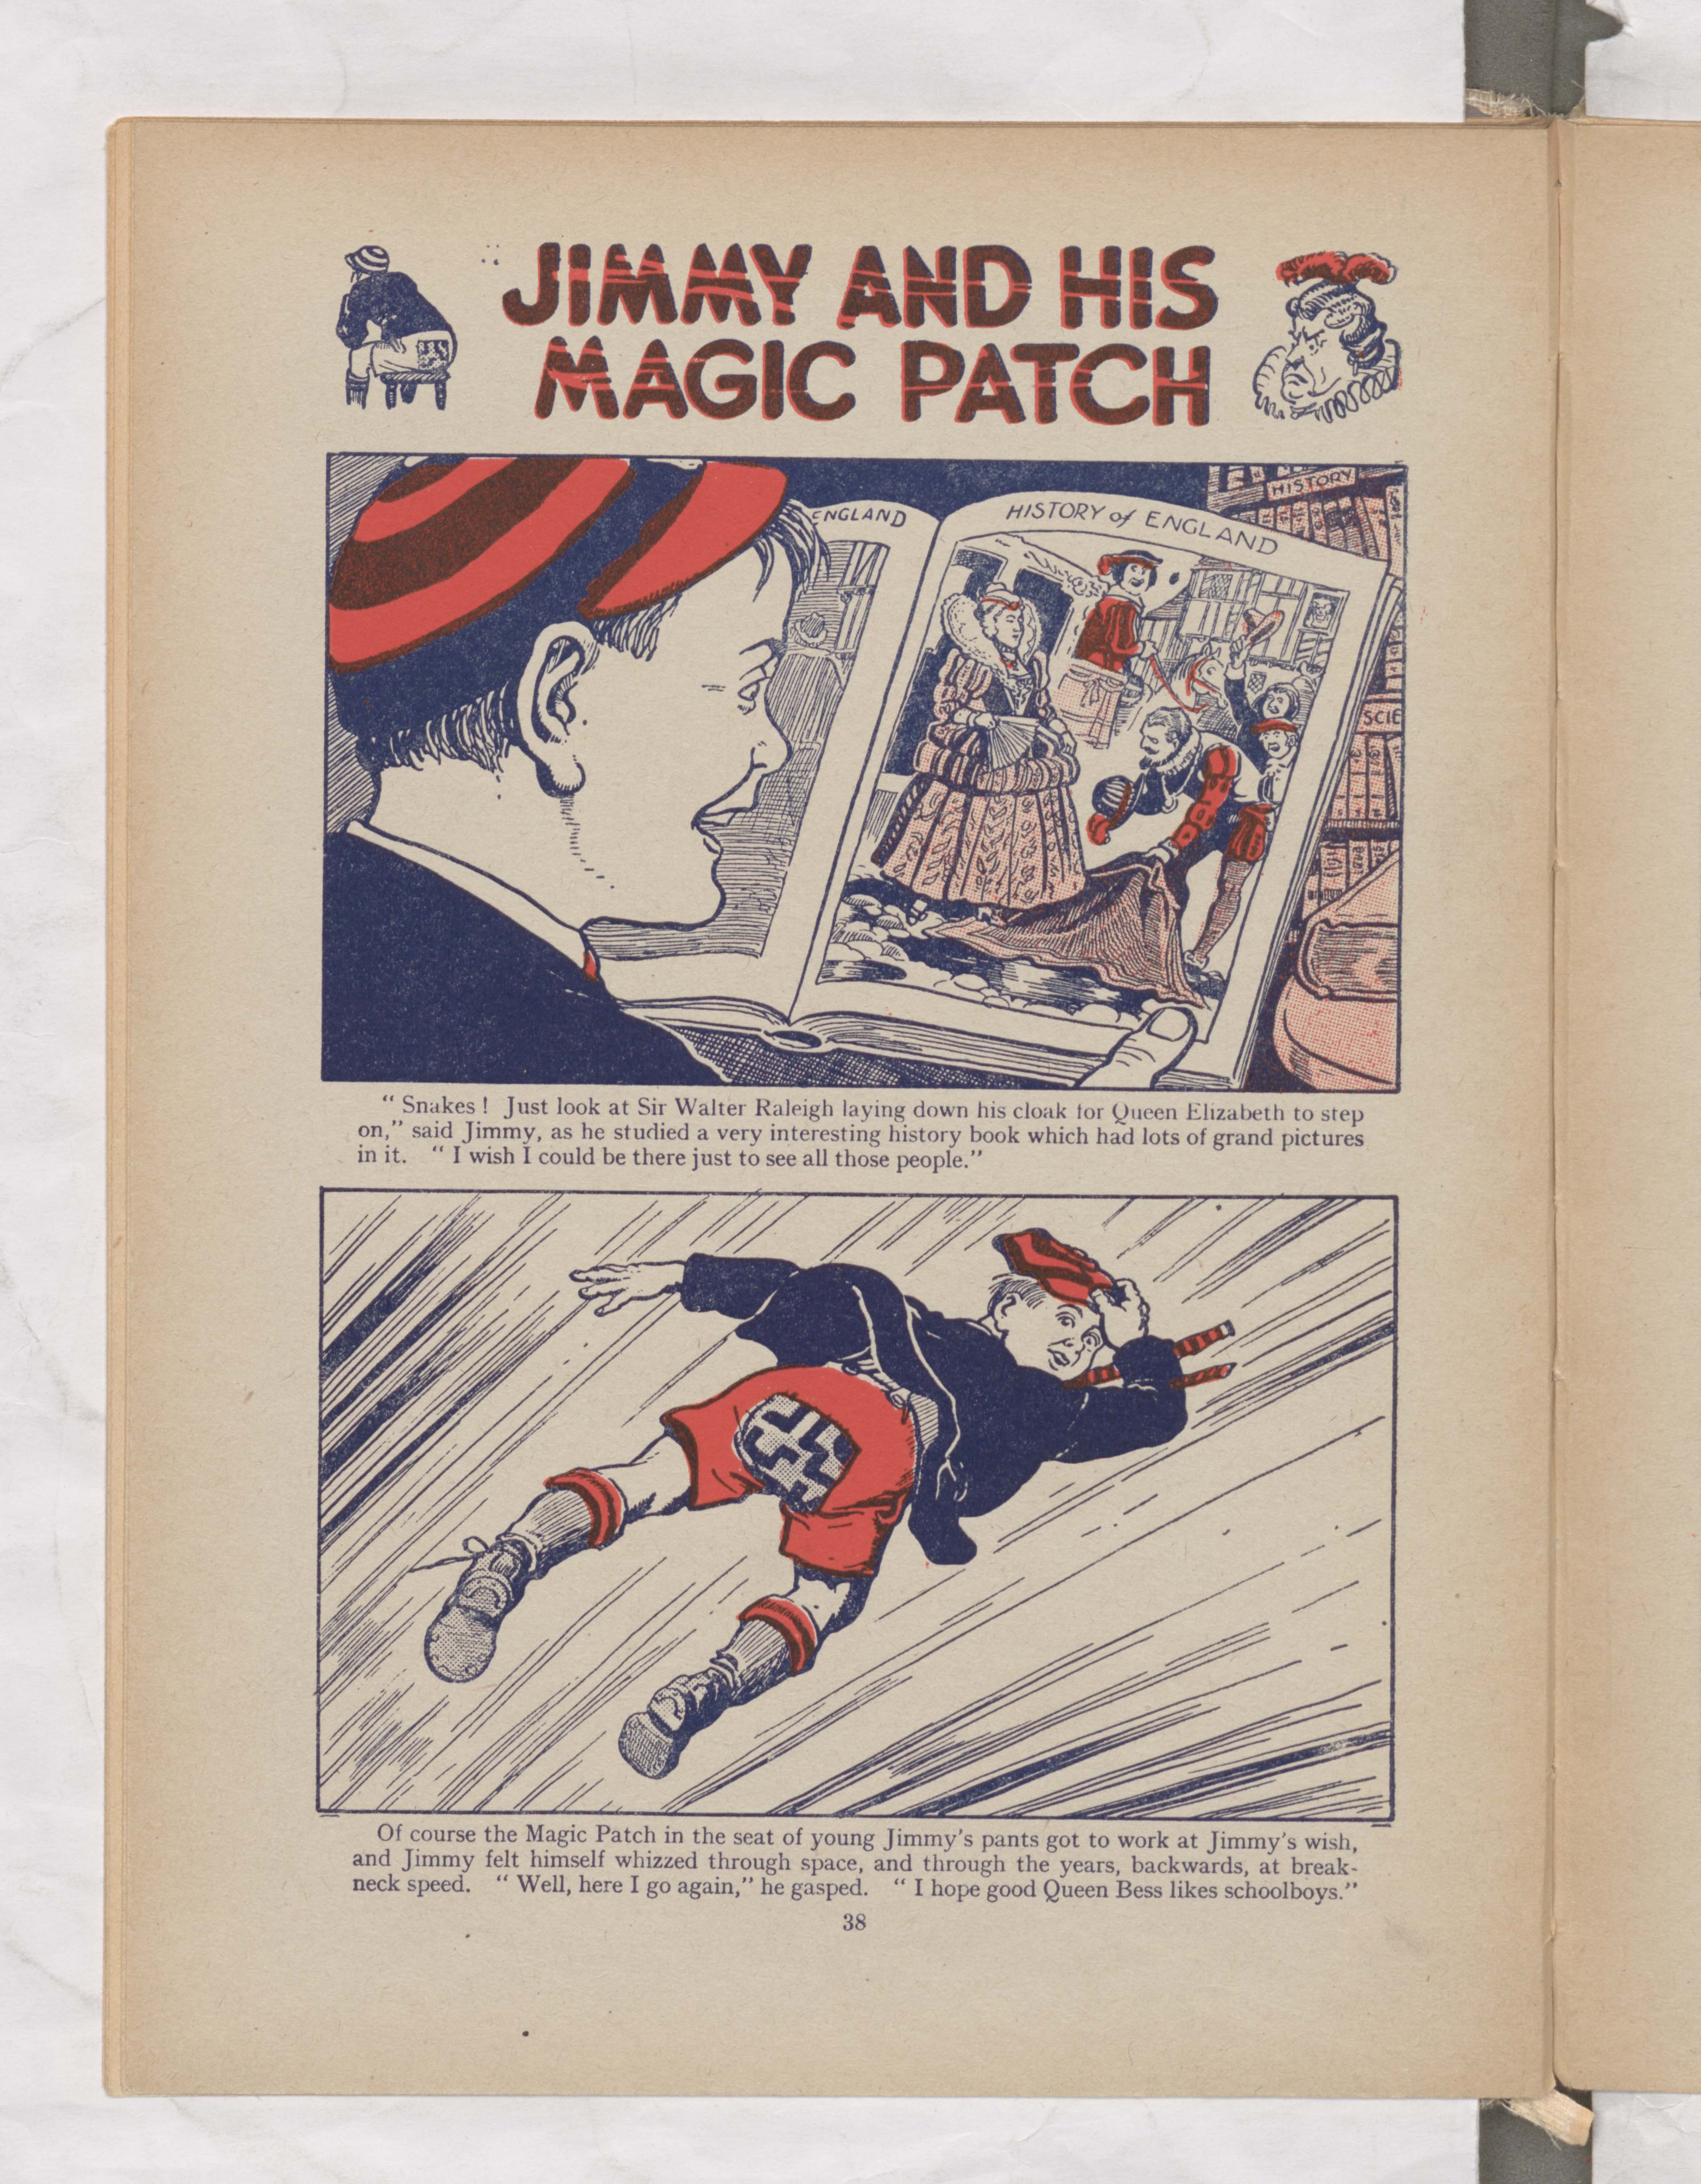 Jimmy and His Magic Patch - Page 1 - Beano Book 1944 Annual